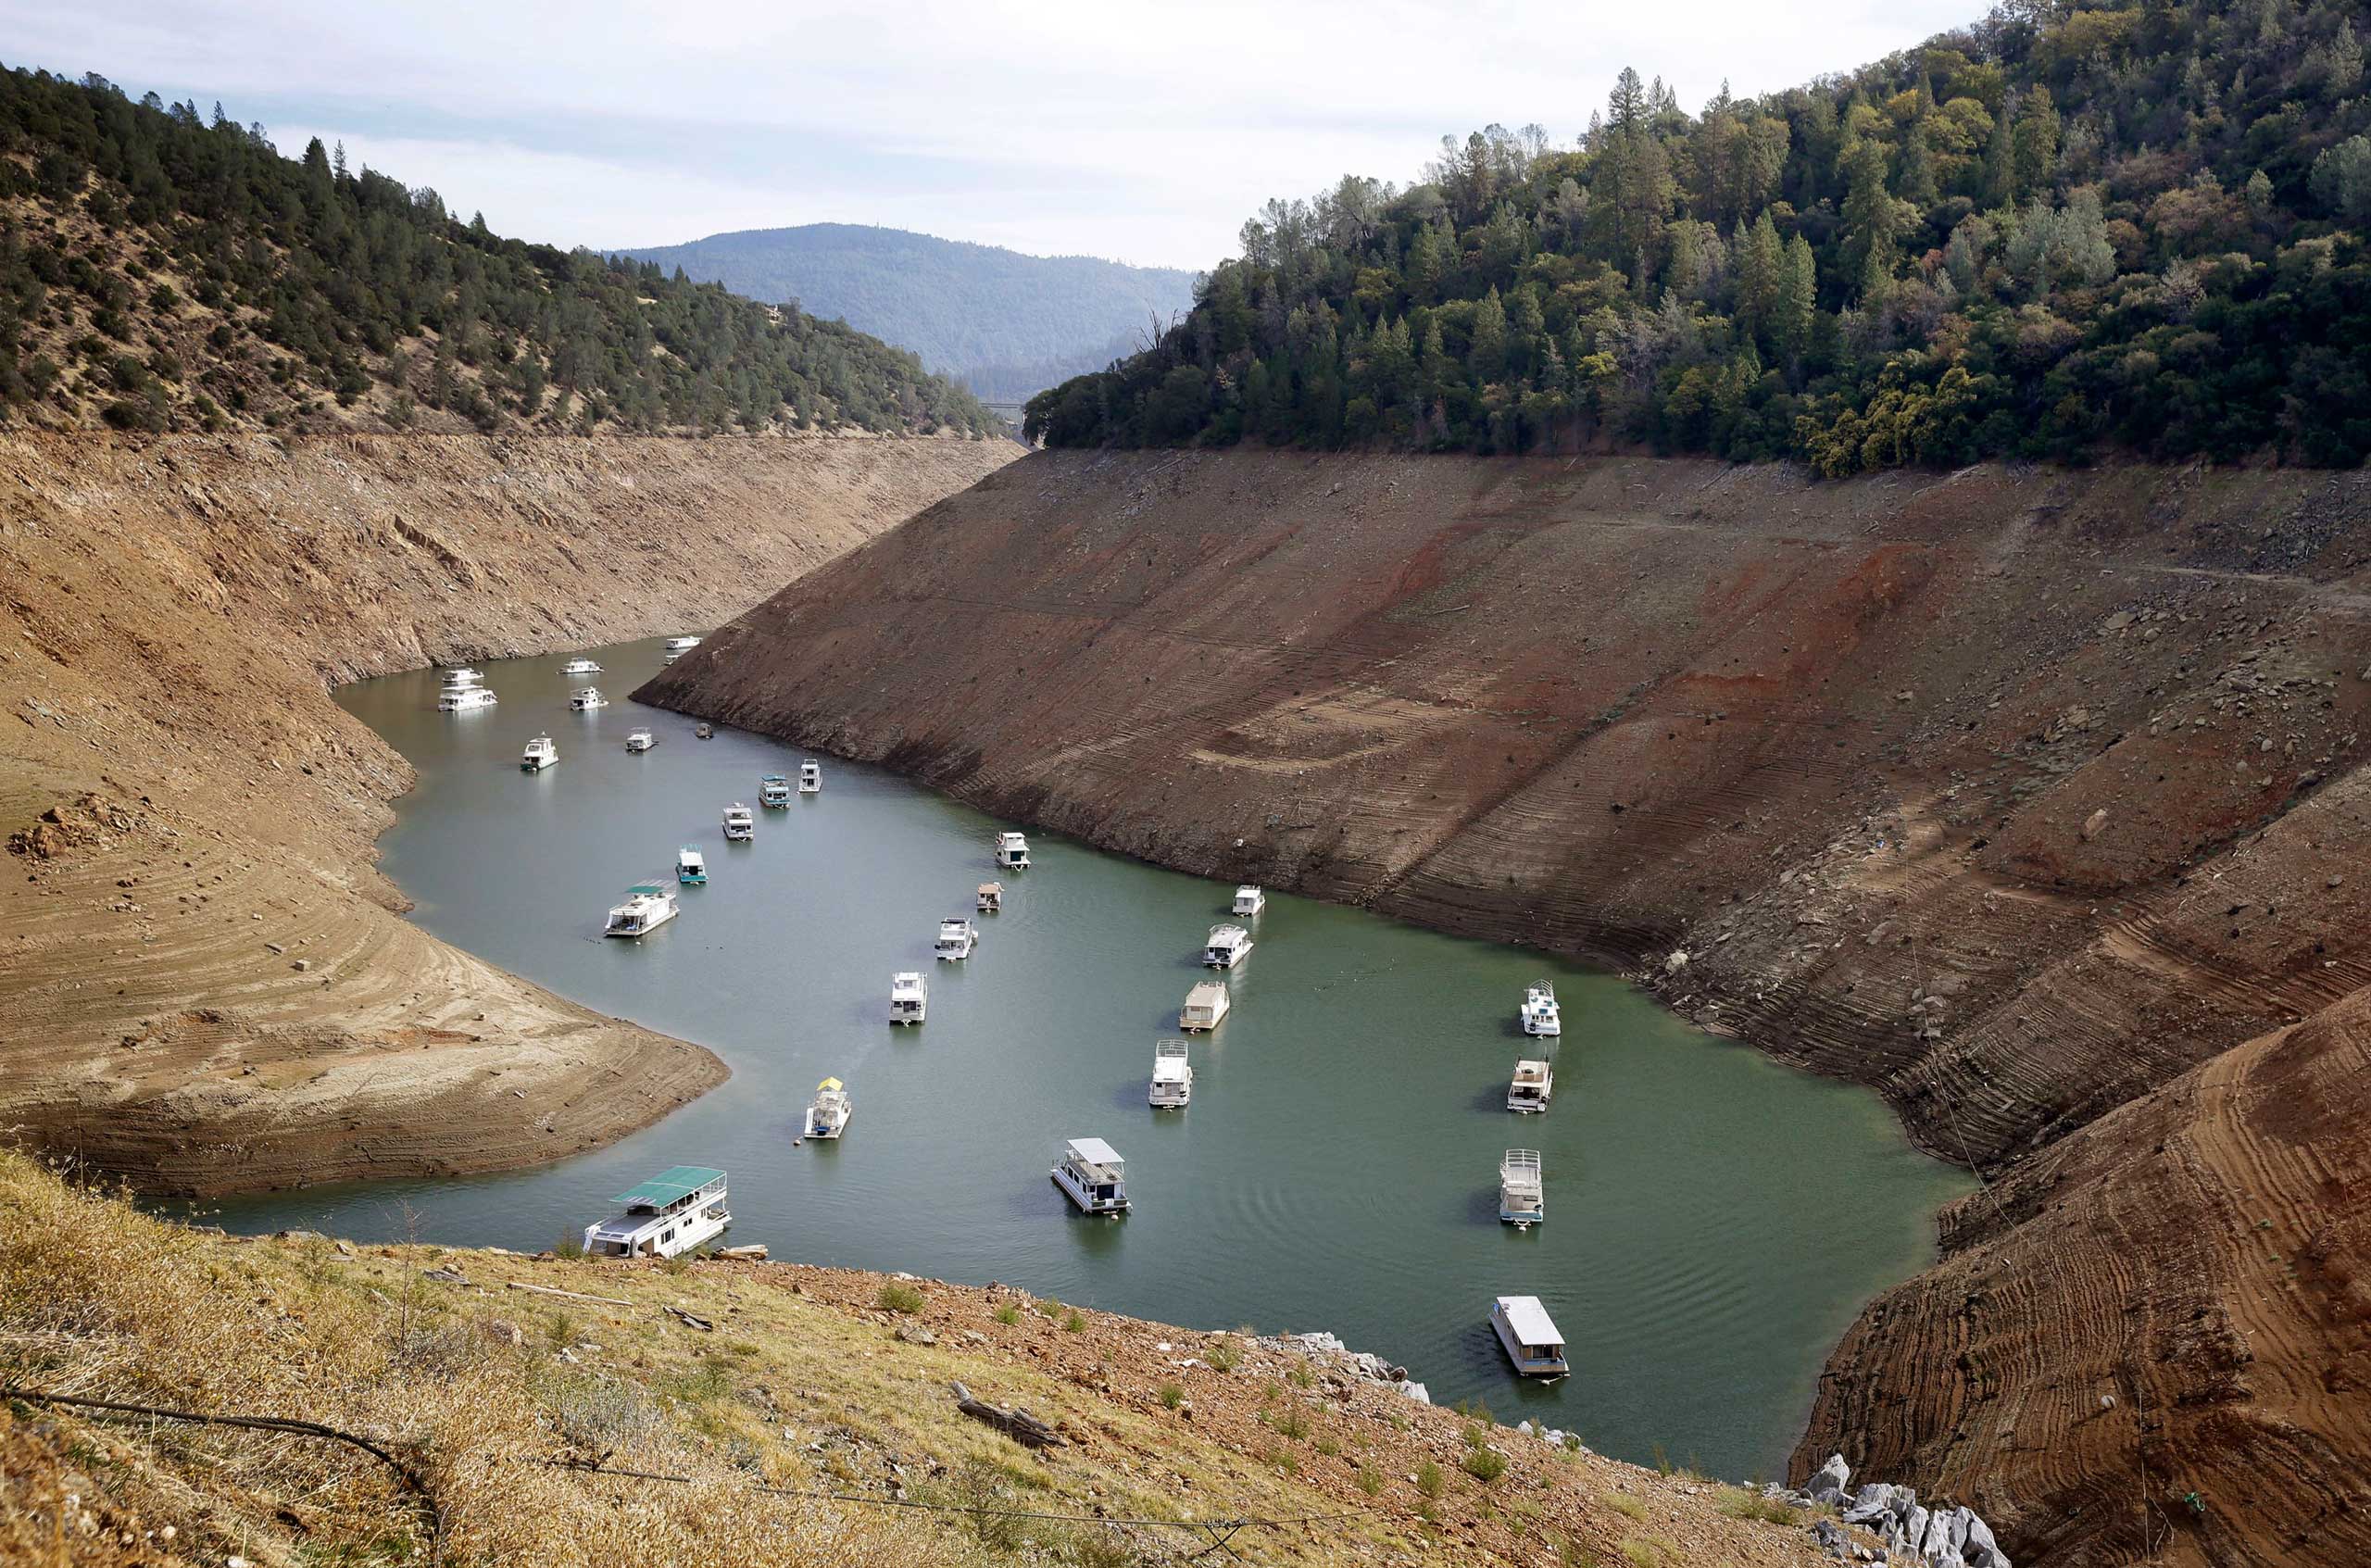 Houseboats sit in the drought lowered waters of Oroville Lake, near Oroville, Calif. in 2014. (Rich Pedroncelli—AP)